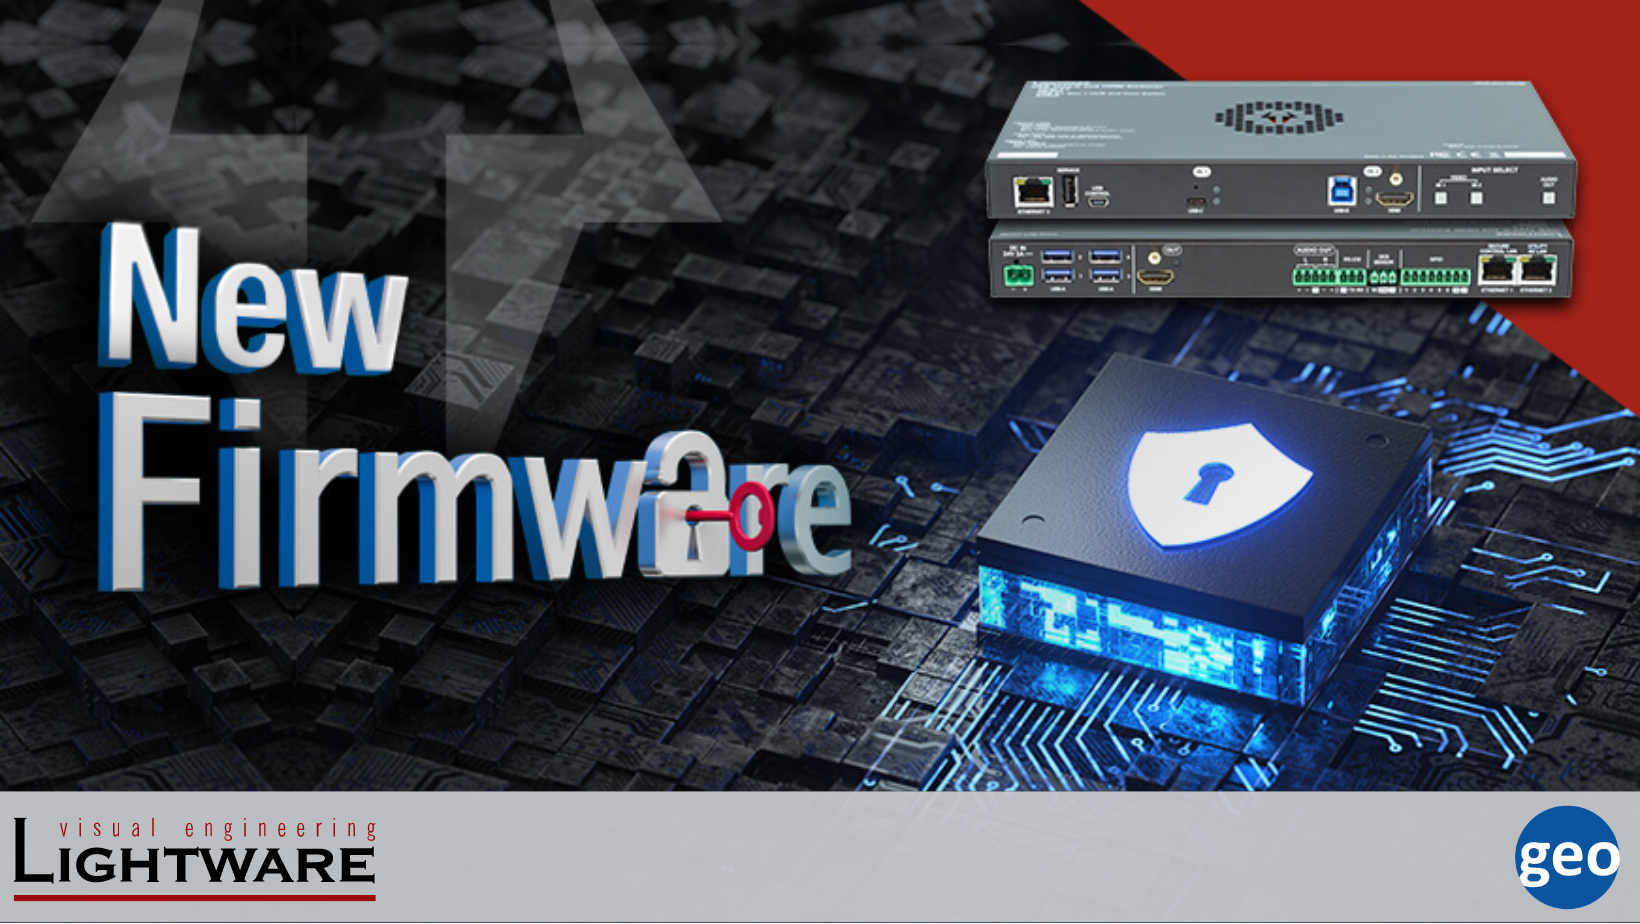 Lightware: Firmware Taurus UCX Device is Now Containing the Long Waited for Advanced Ethernet Security Feature